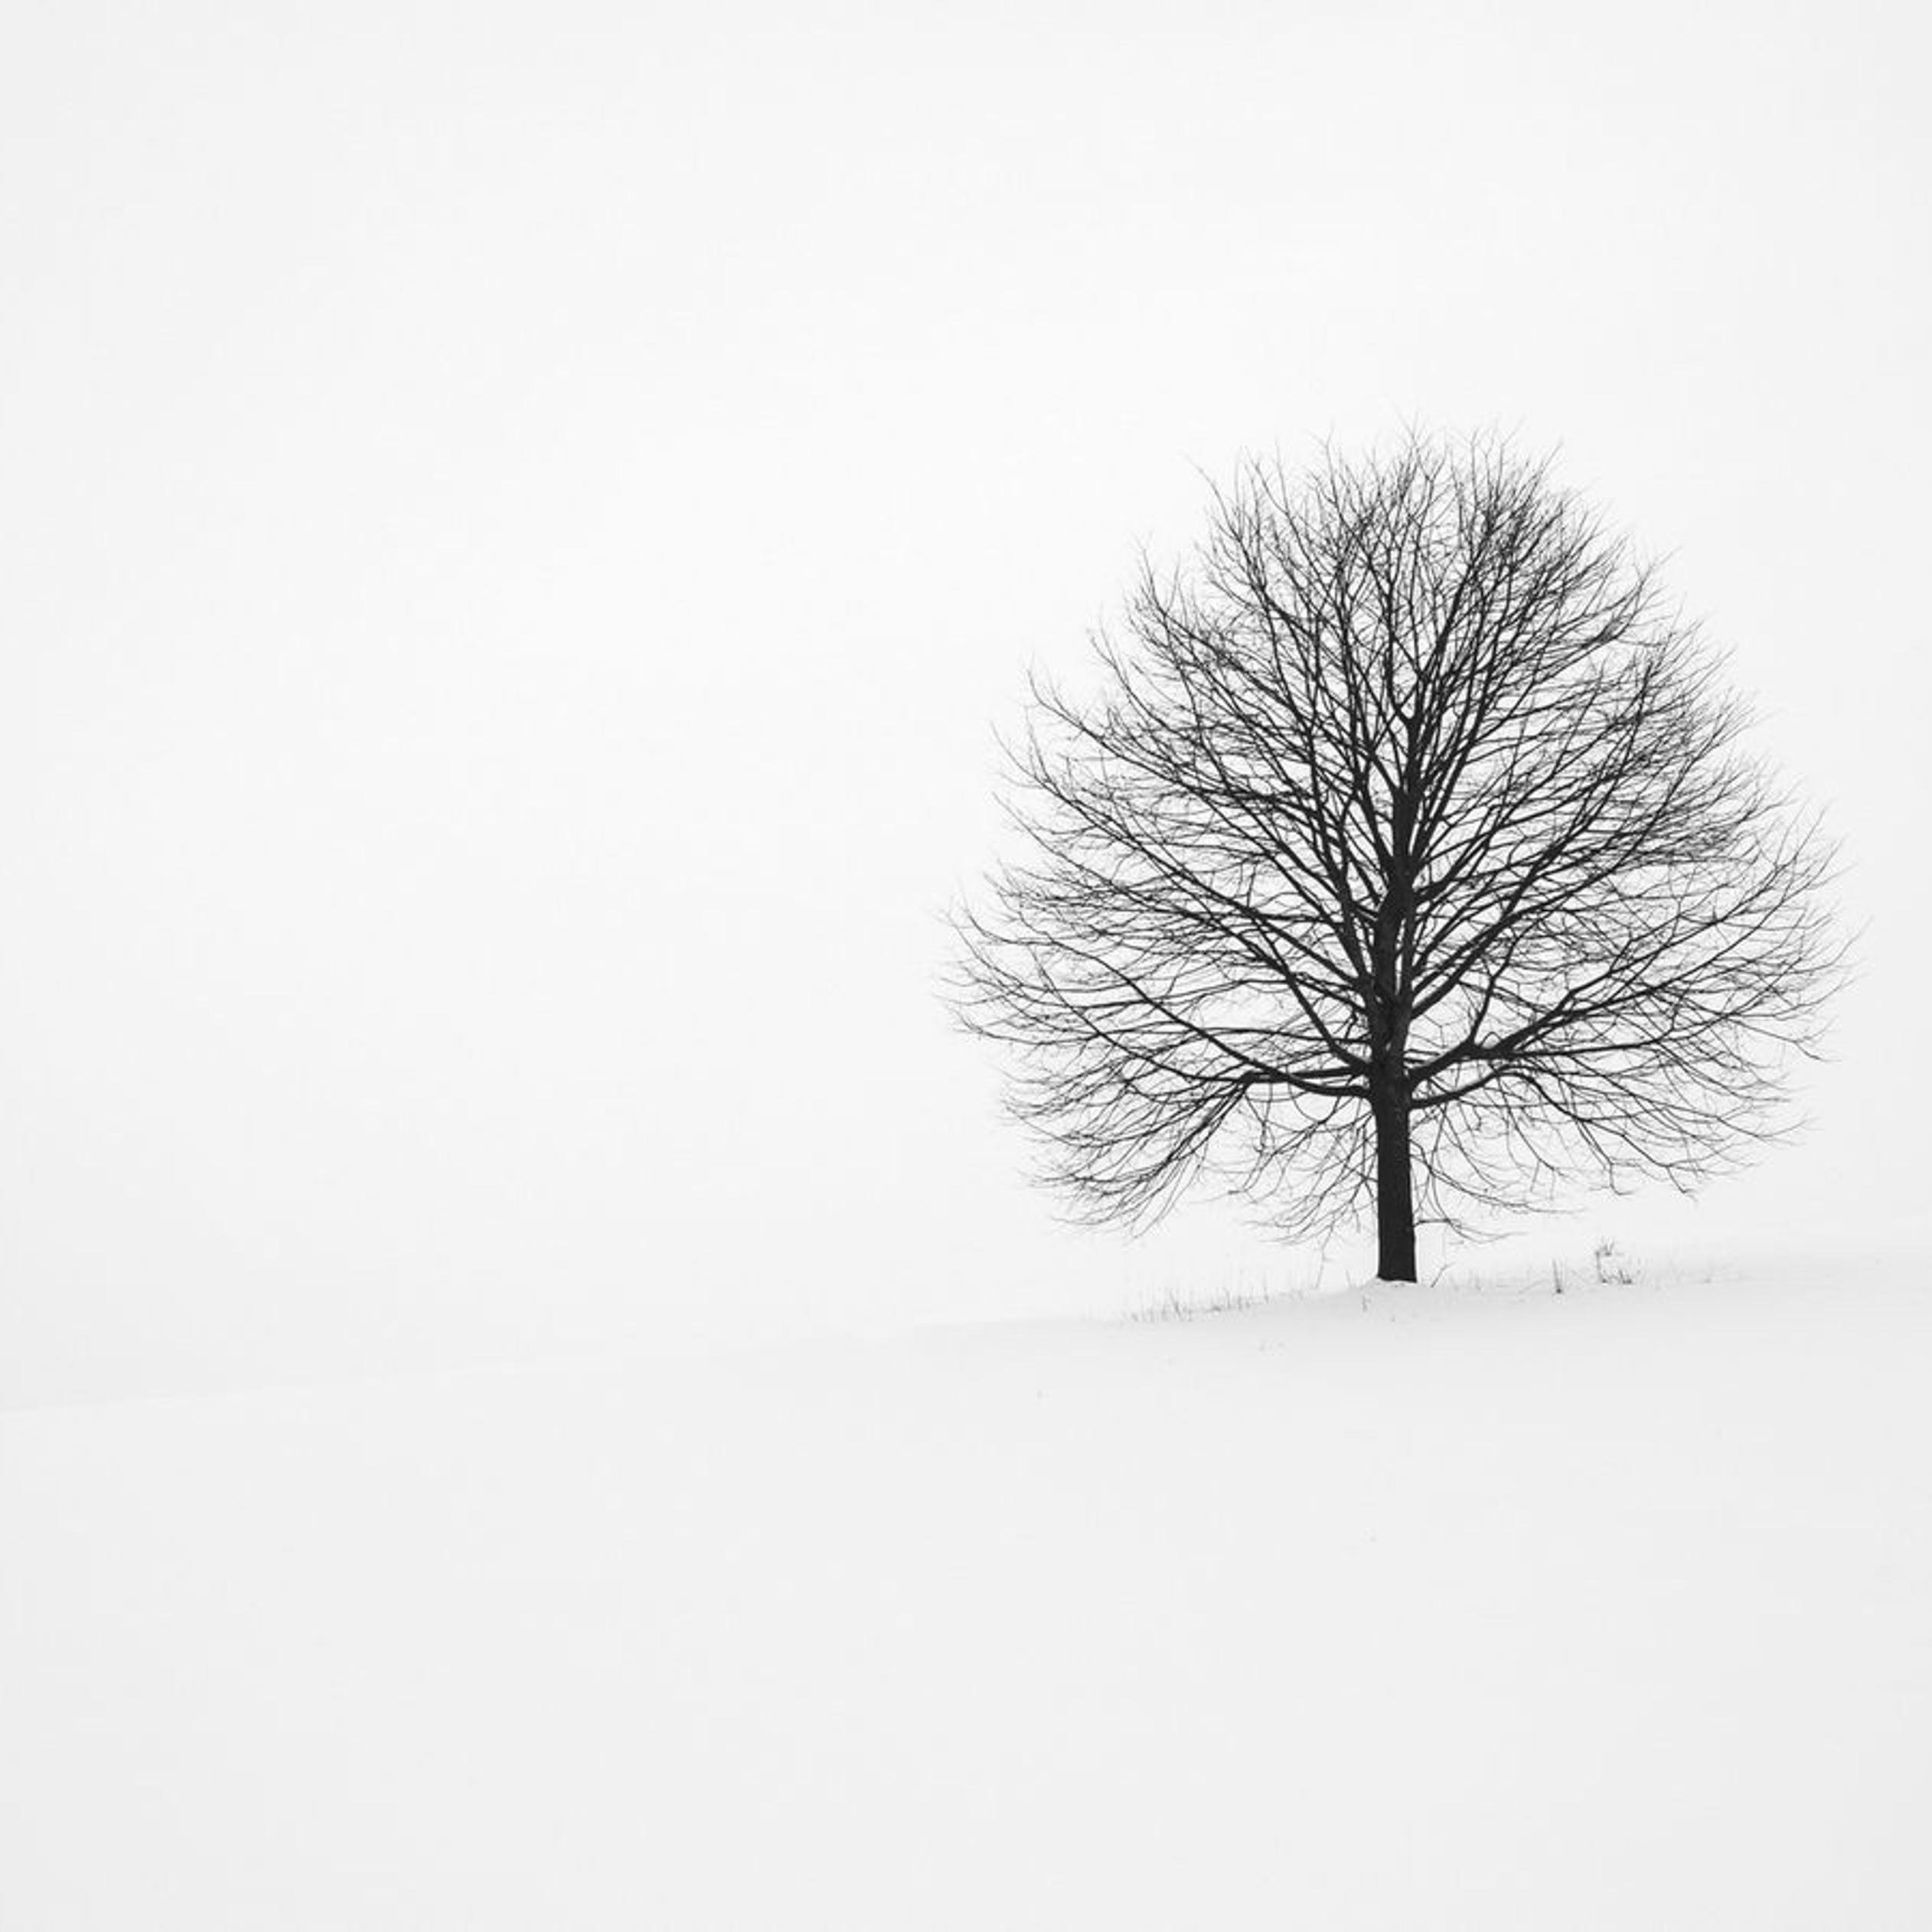 White nature and one single tree